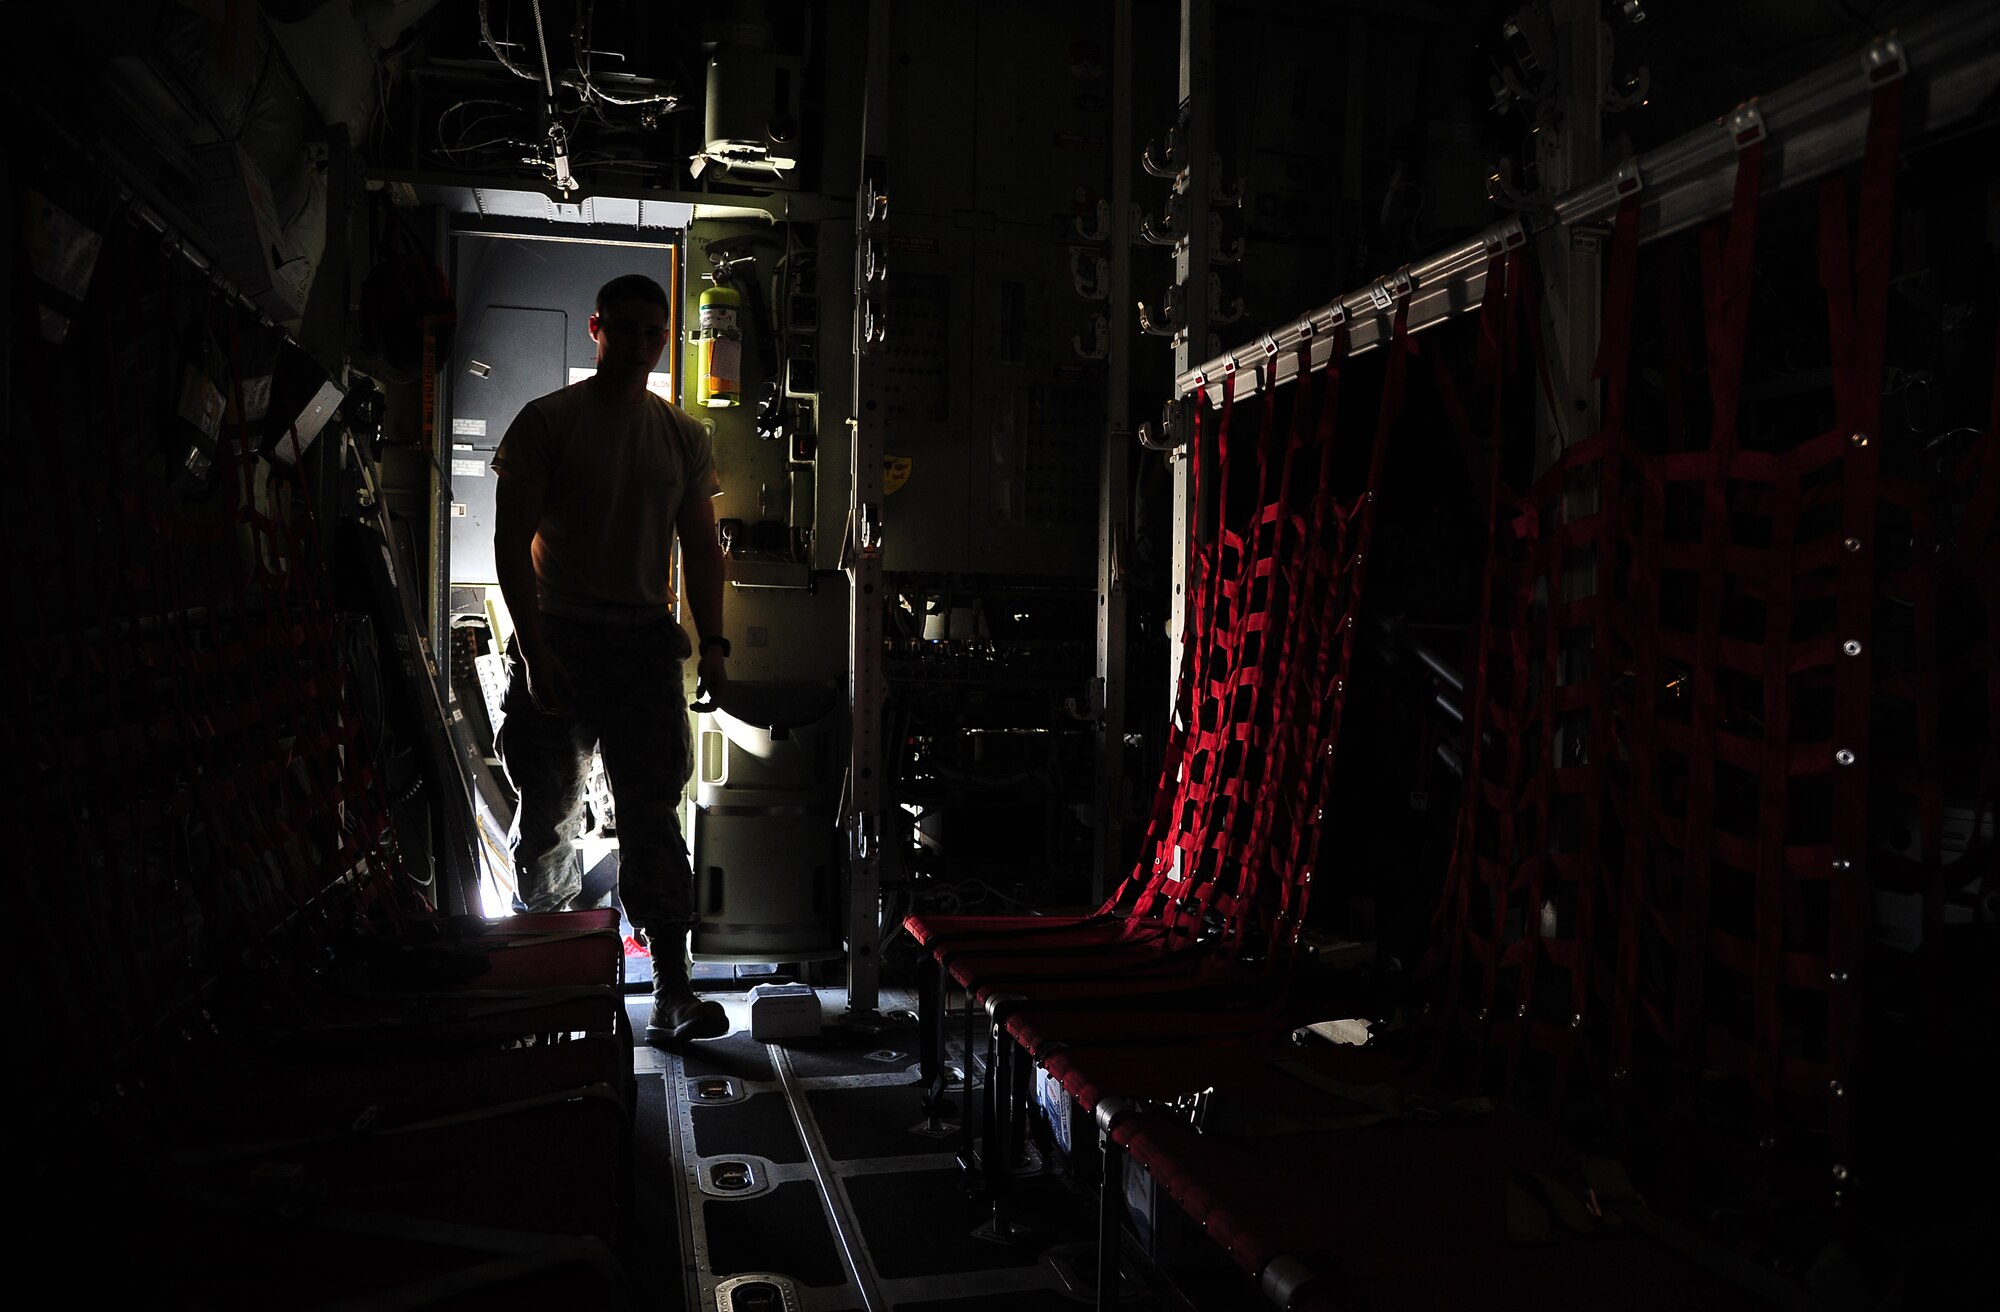 U.S. Air Force Senior Airman Beau Lewis, a crew chief with the 146th Aircraft Maintenance Squadron at Channel Islands Air National Guard Station, Calif., does routine maintenance on a C-130J Hercules during Exercise Eager Lion May 29, 2014, at an air base in northern Jordan. During the annual exercise, more than 12,500 personnel from over 20 nations joined forces to enhance regional security and stability through various scenarios. (U.S. Air Force photo by Staff Sgt. Brigitte N. Brantley/Released)